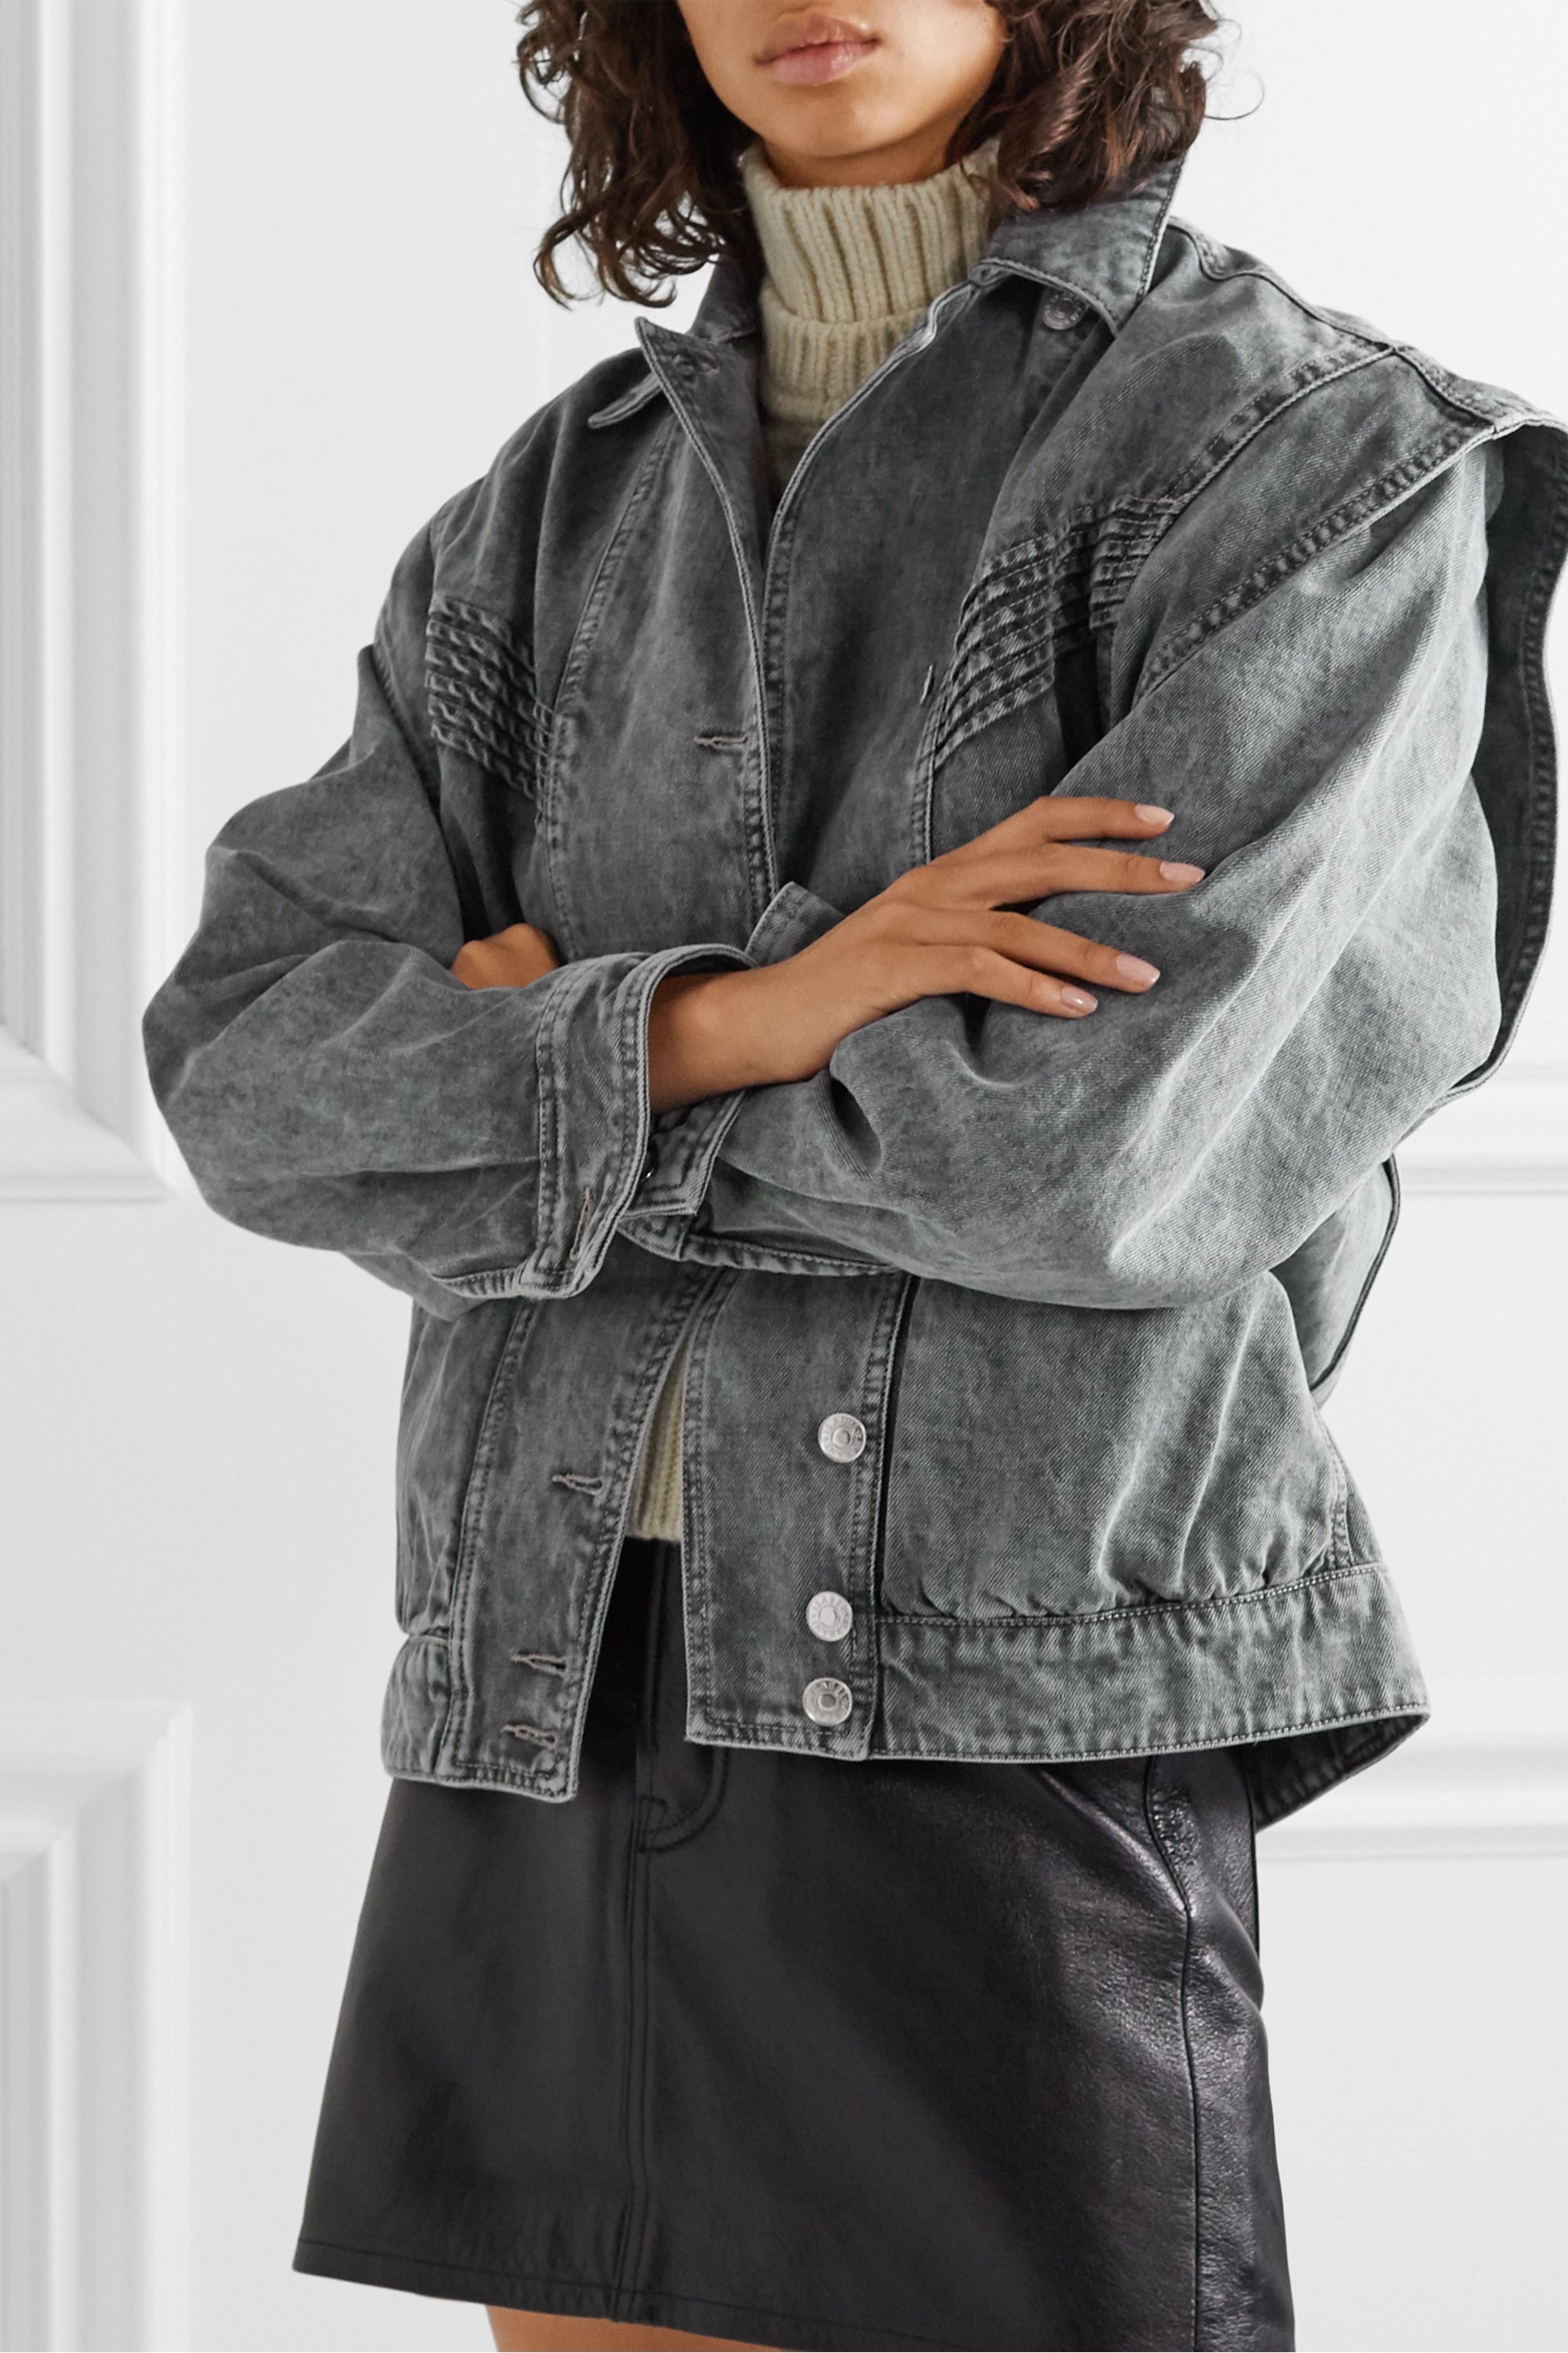 jean jacket with grey sleeves outfits